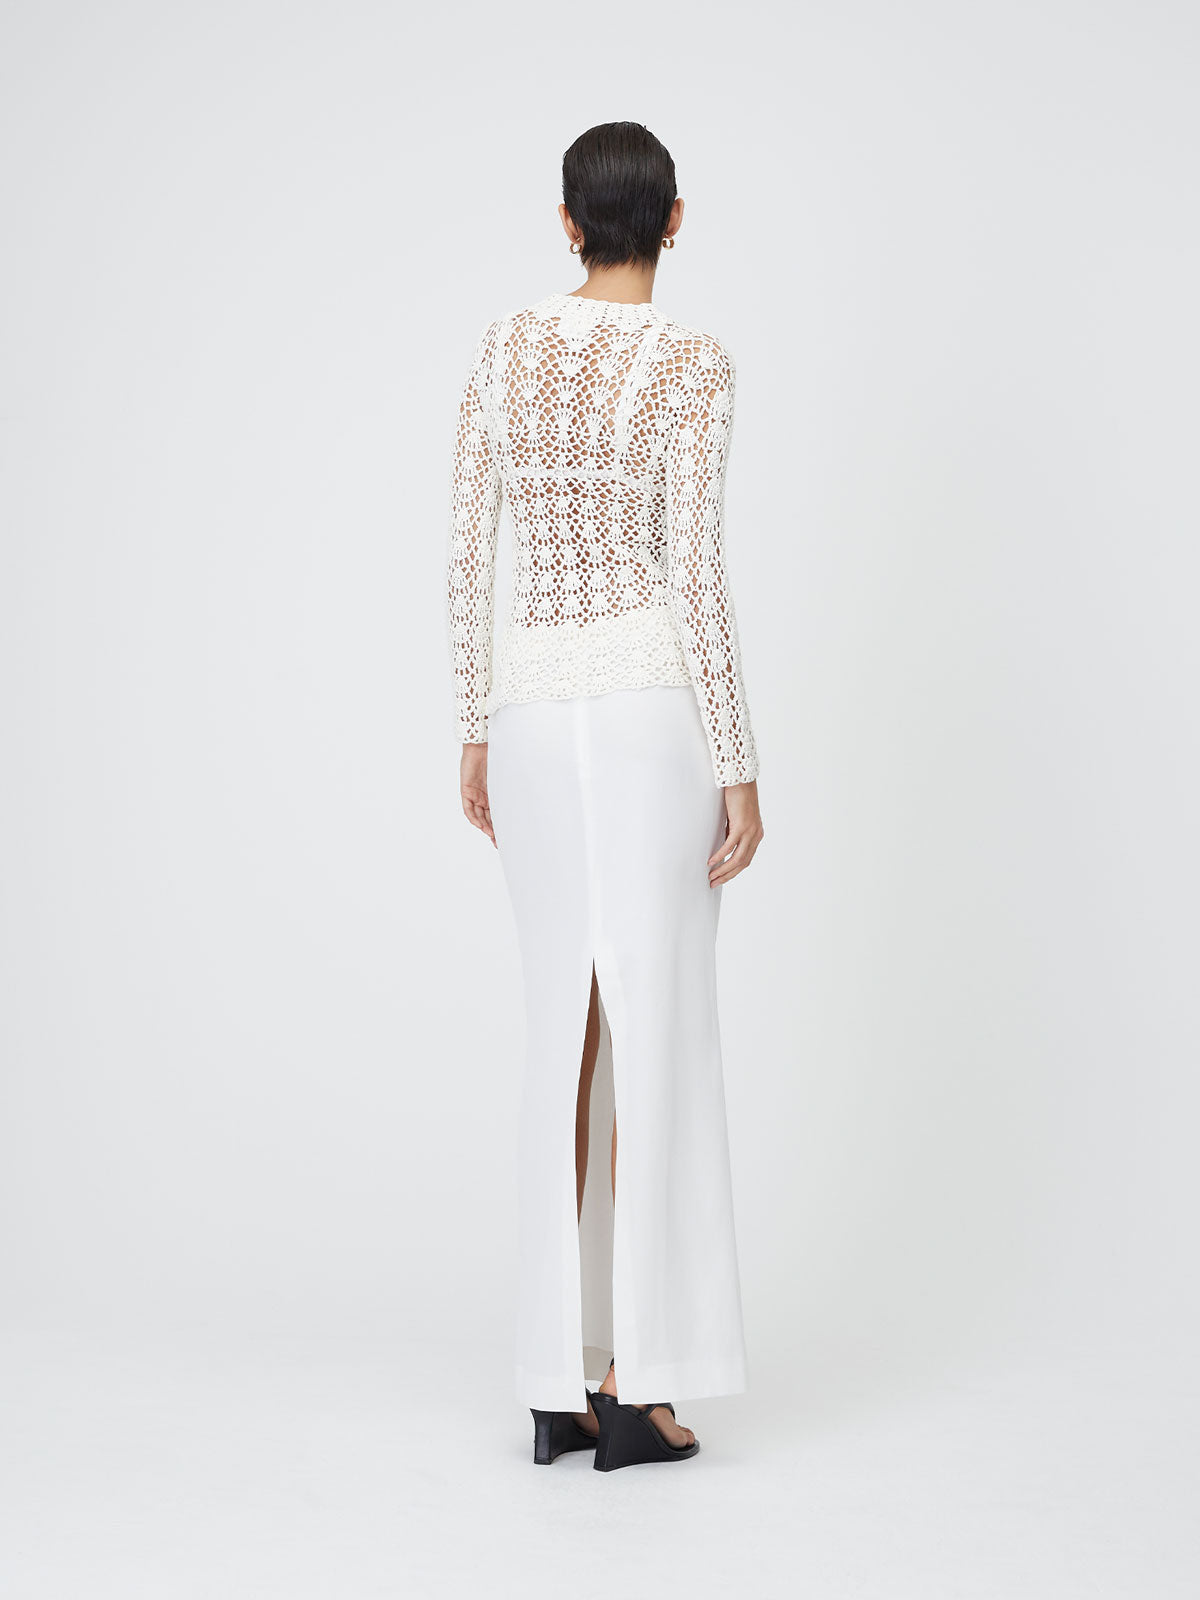 Back view of a model wearing the White 9 Crochet Top on top of a white background